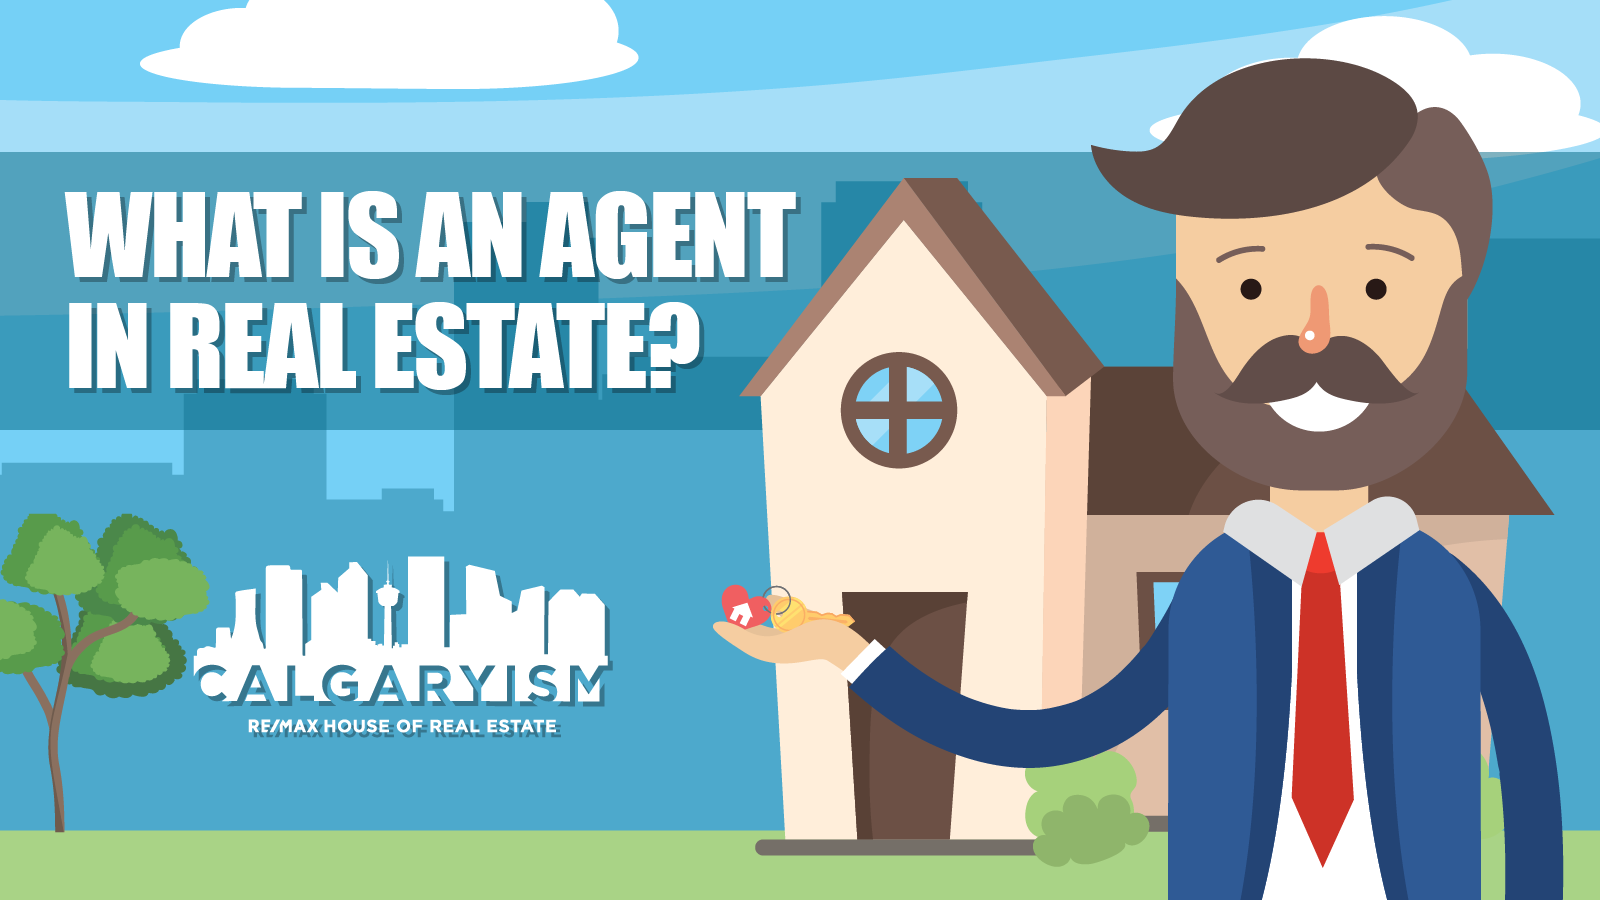 What is an agent in real estate